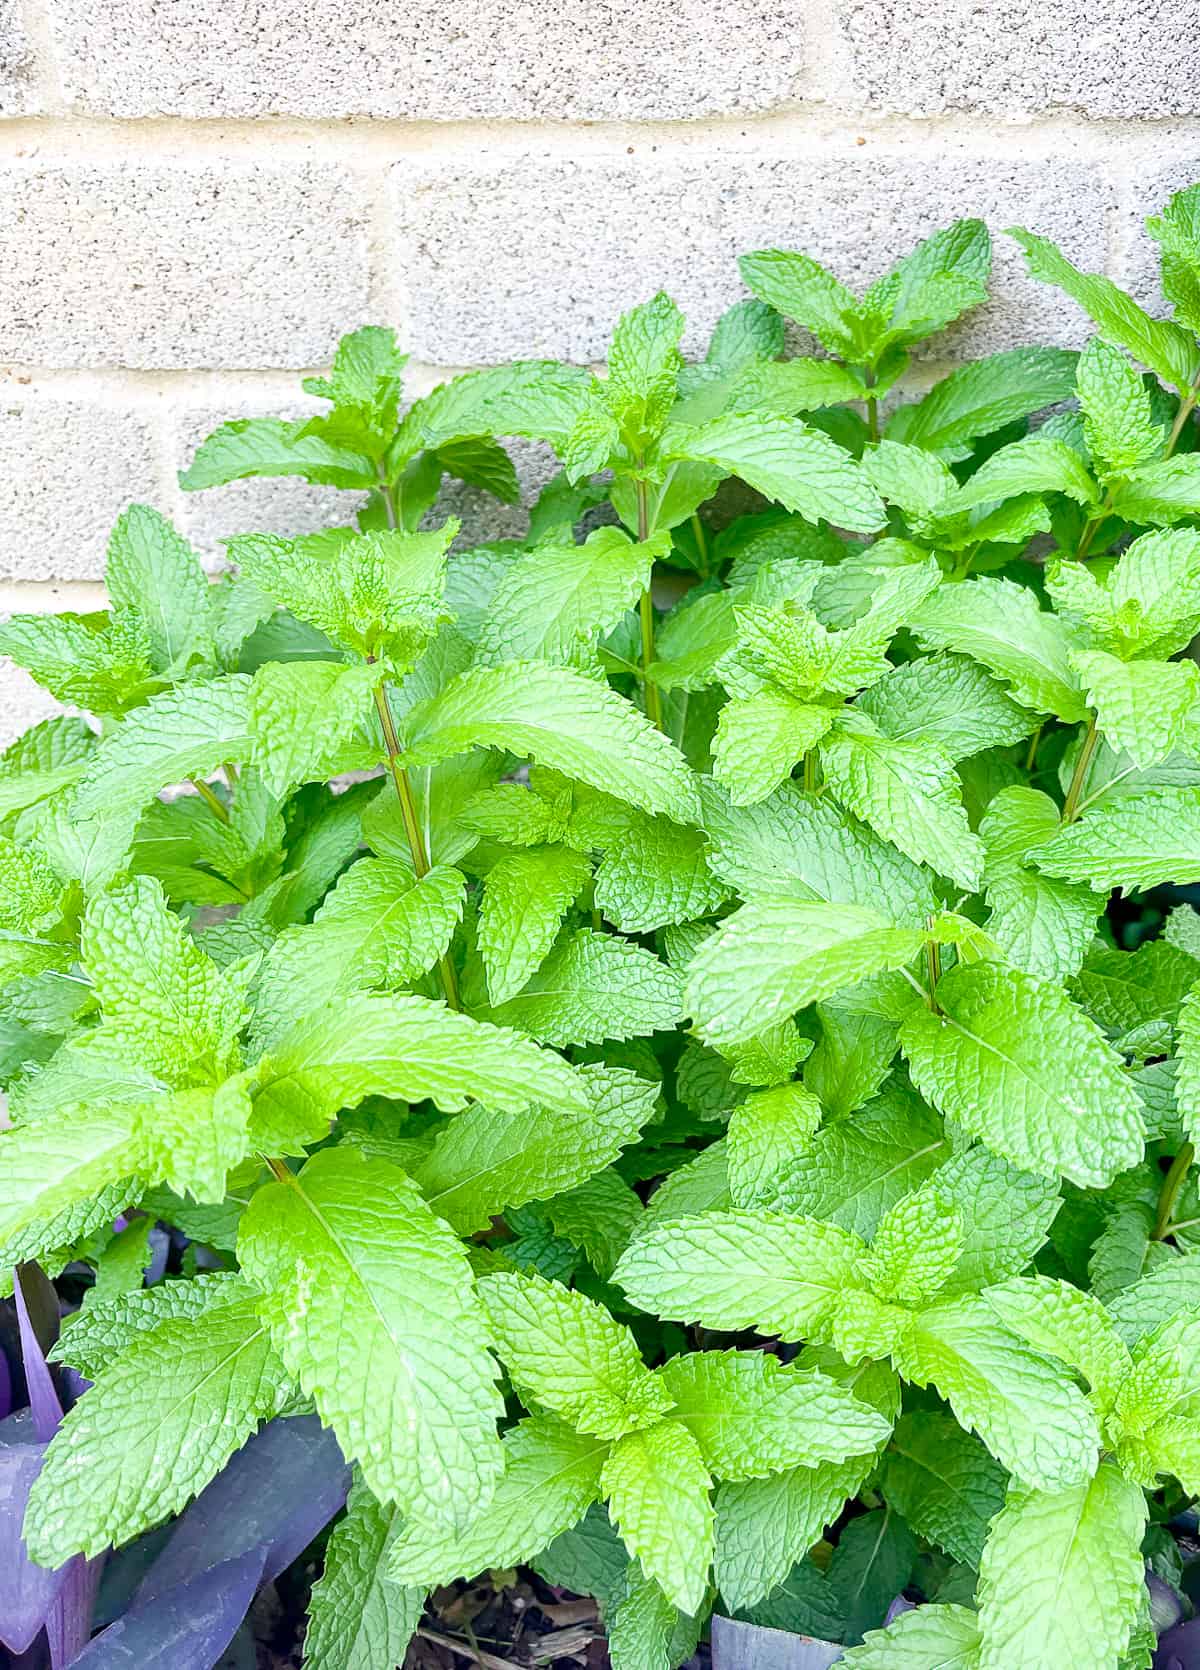 A patch of mint in our garden against our brick house.